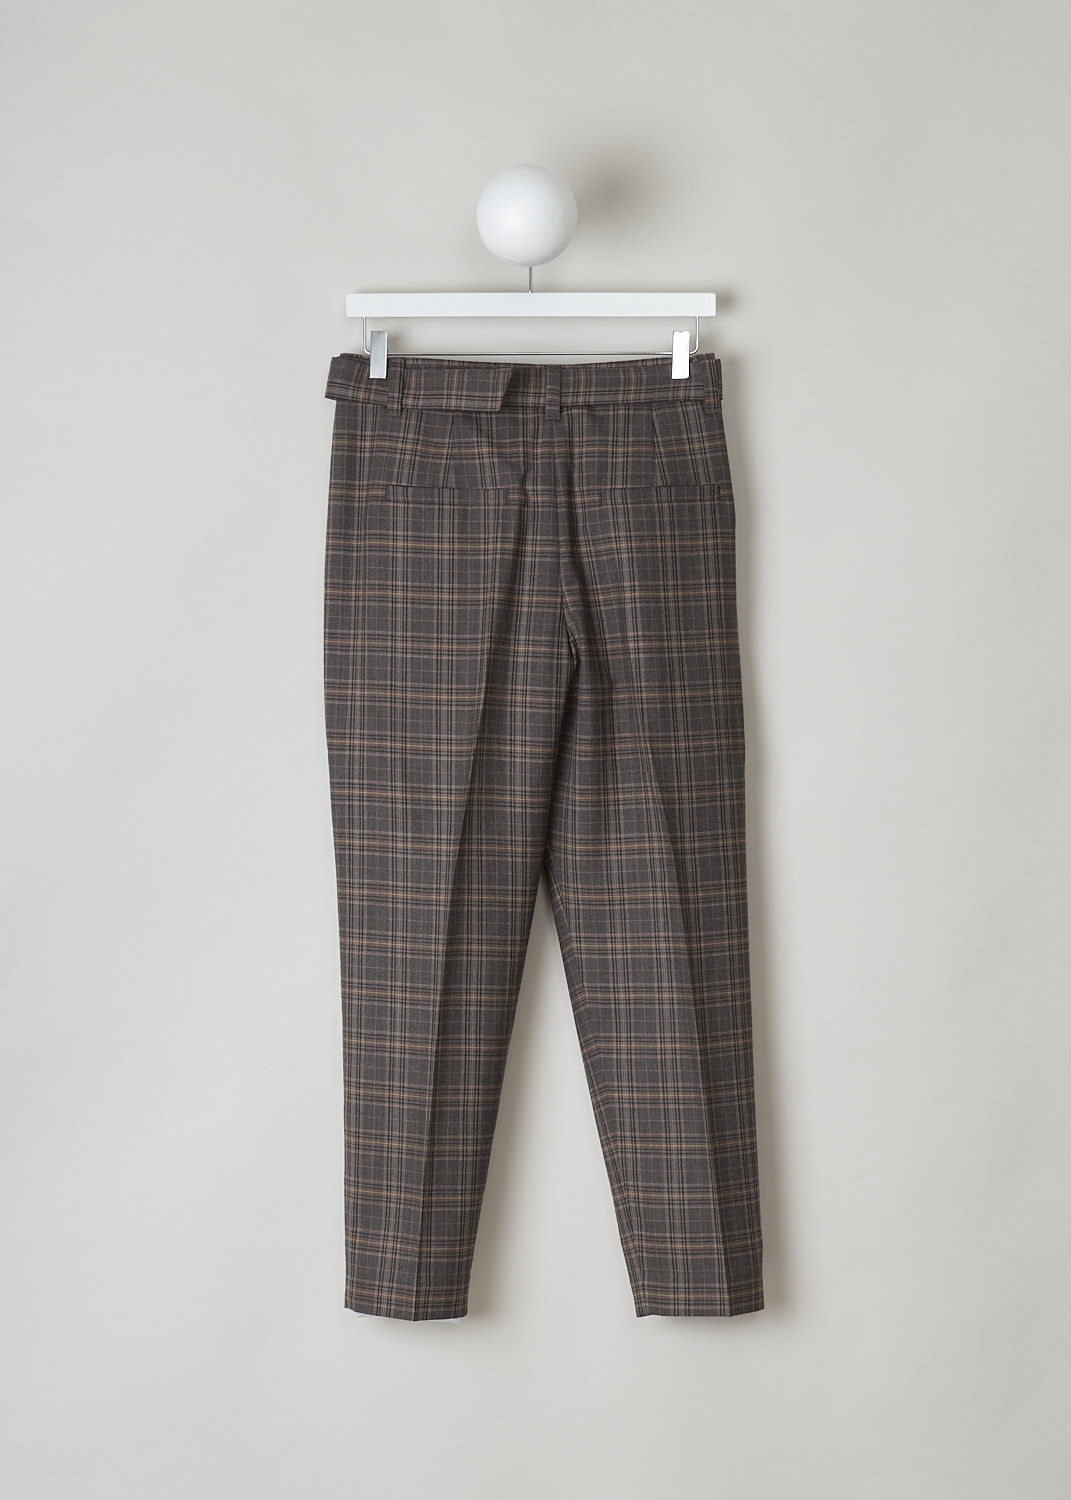 BRUNELLO CUCINELLI, BROWN CHECKERED PANTS WITH BELT, MA143P7055_C001, Brown, Print, Back, These brown checkered pants come with a detachable belt in the same fabric with a metal belt buckle. The pants have tapered pant legs with pressed centre creases. These pants have slanted pockets in the front and welt pockets in the back.

